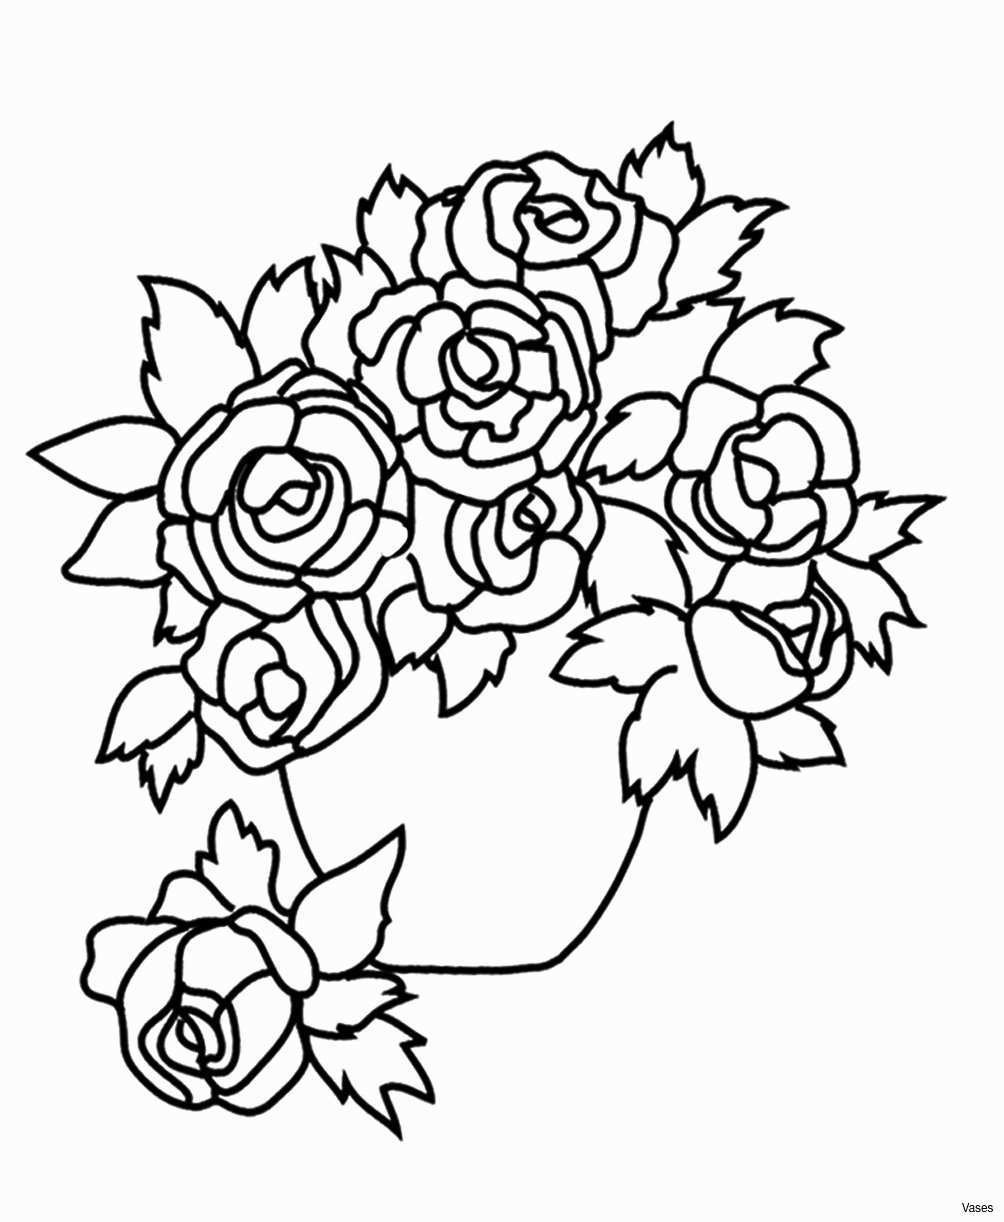 25 Elegant Flowers In A Vase 2024 free download flowers in a vase of fish bowl coloring page awesome vases flower vase coloring page pertaining to fish bowl coloring page awesome vases flower vase coloring page pages flowers in a top i